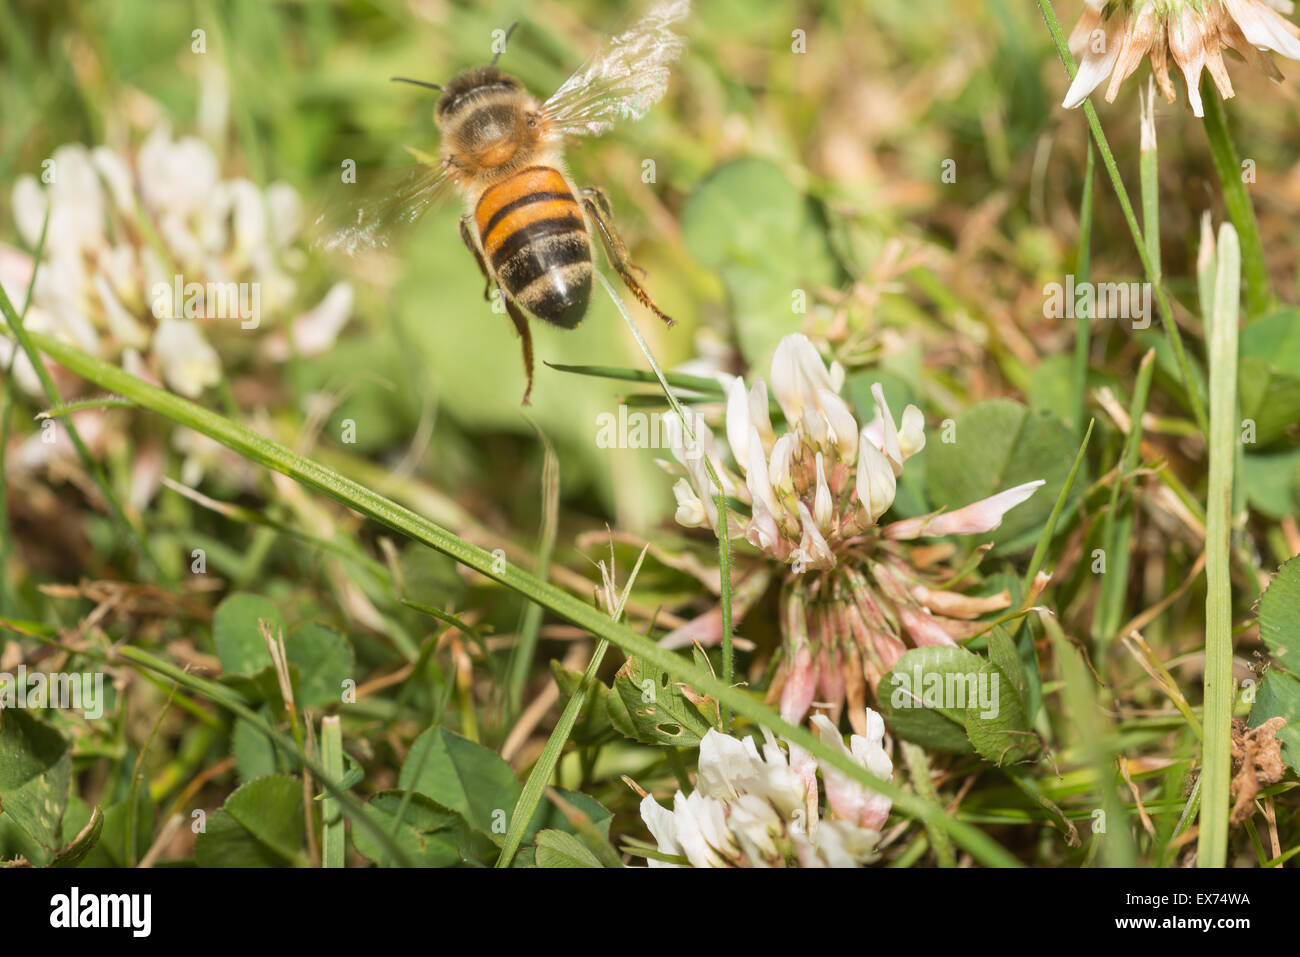 Honey bee worker using its long proboscis to drink nectar from white clover flowers before taking off Stock Photo